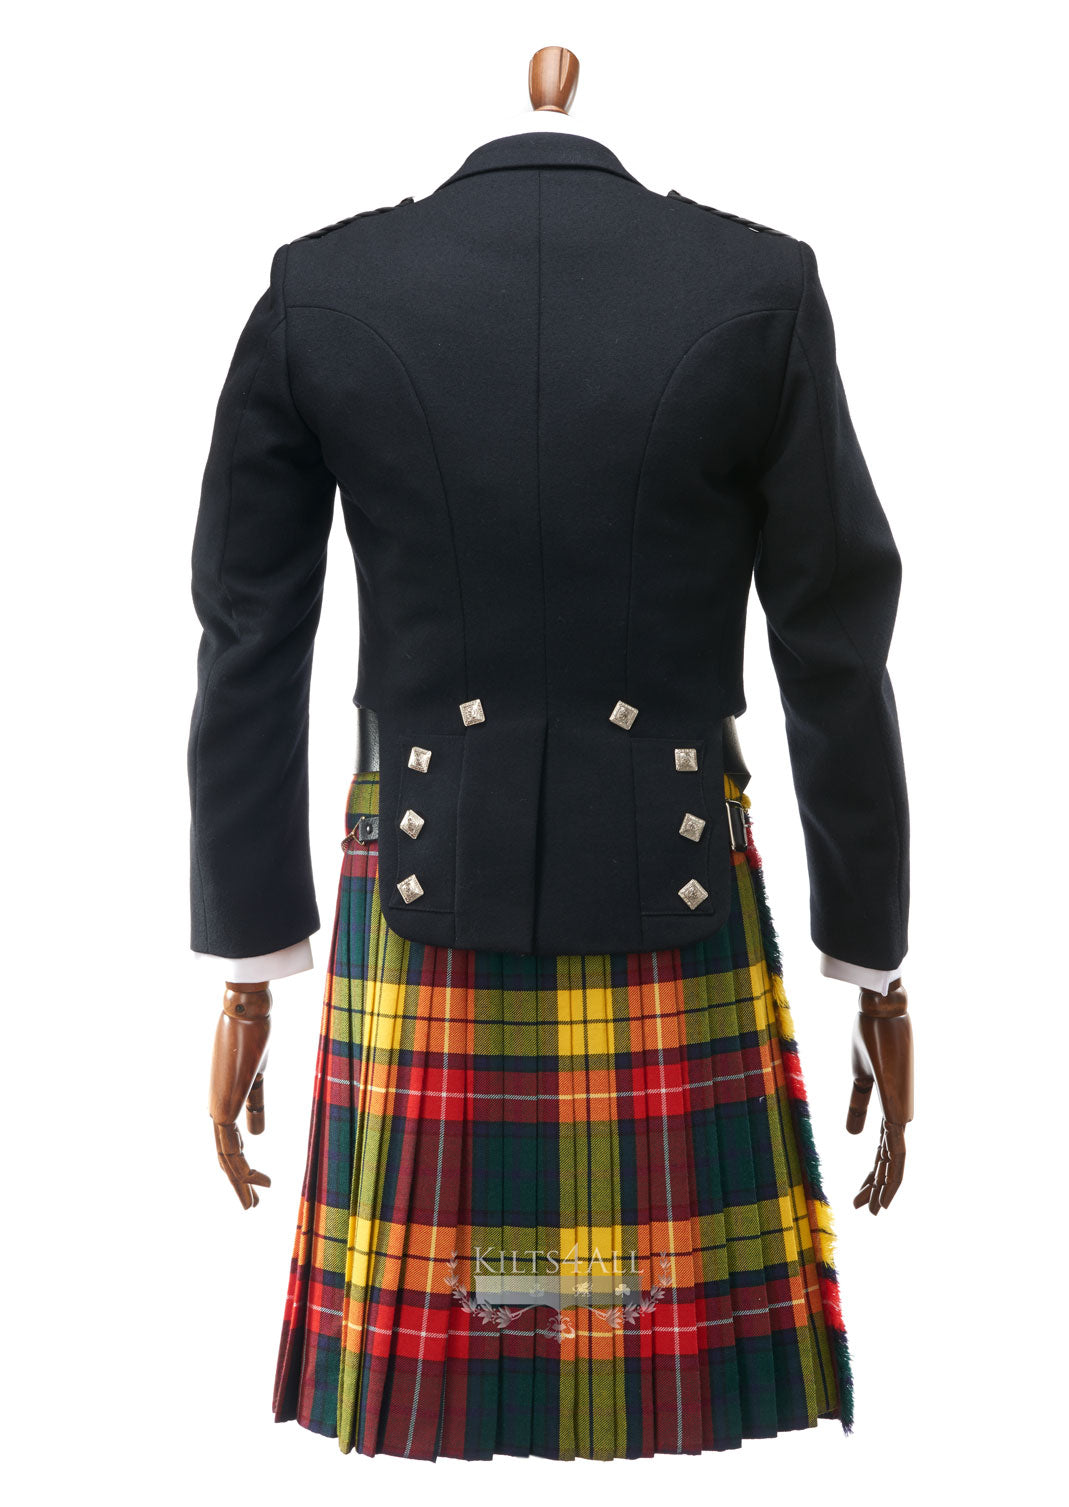 Mens Prince Charlie Jacket & 5 Button Waistcoat to Hire